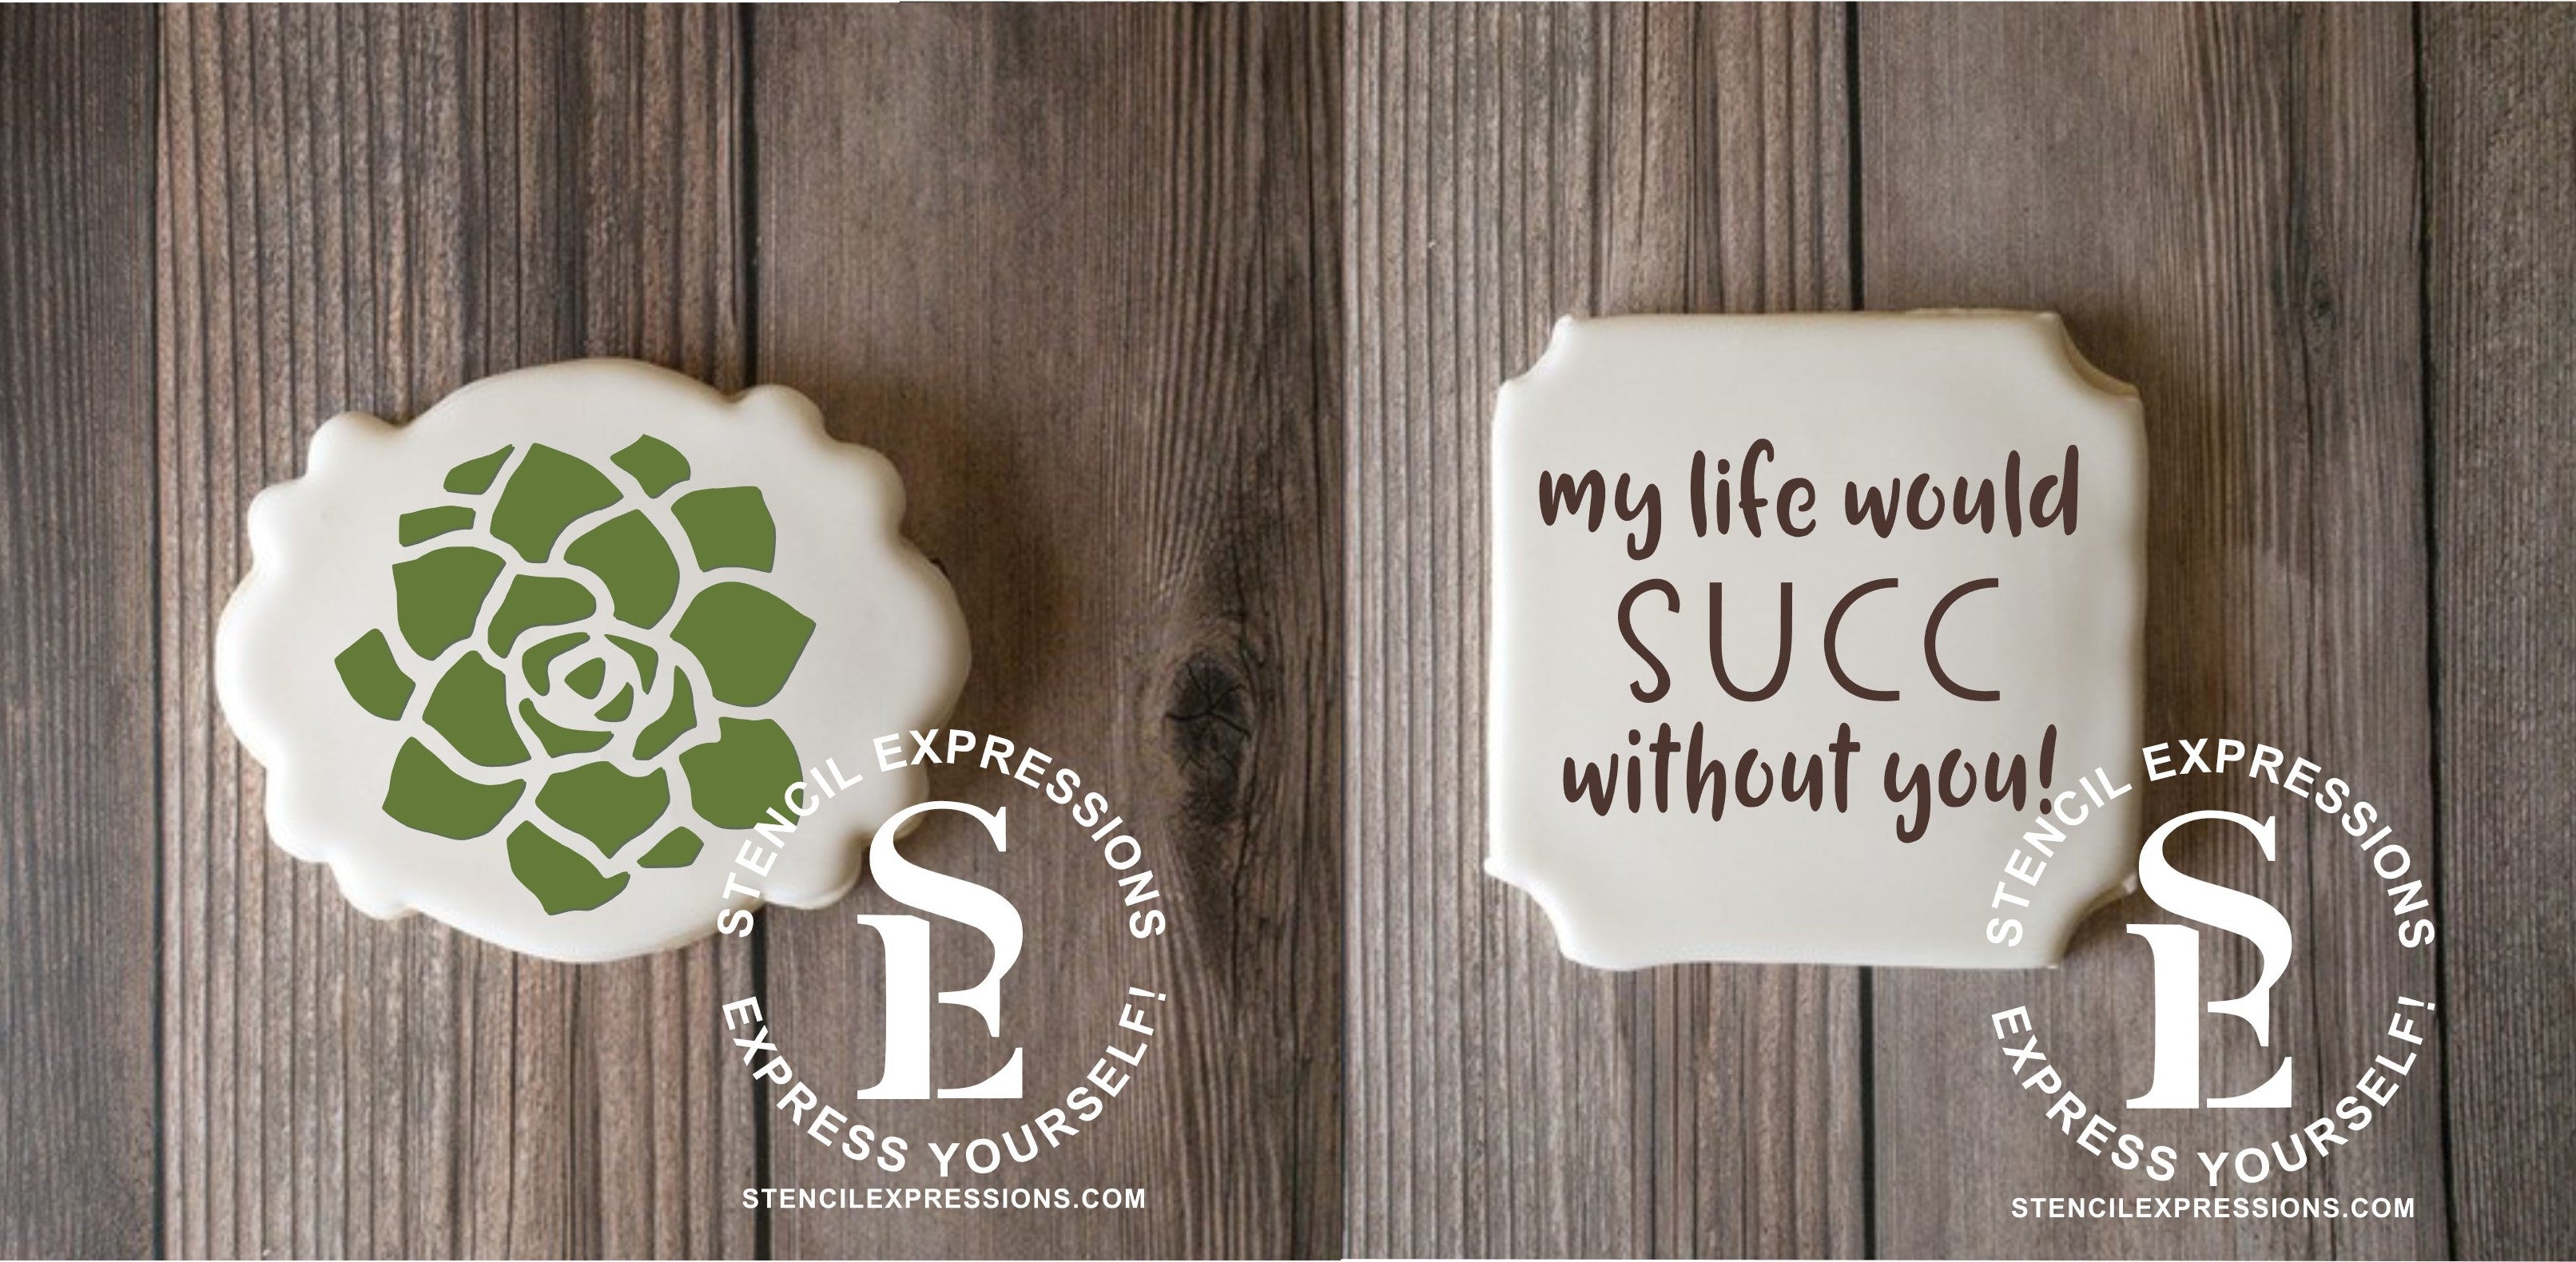 My Life Would SUCC Without You Sentiment Digital Design